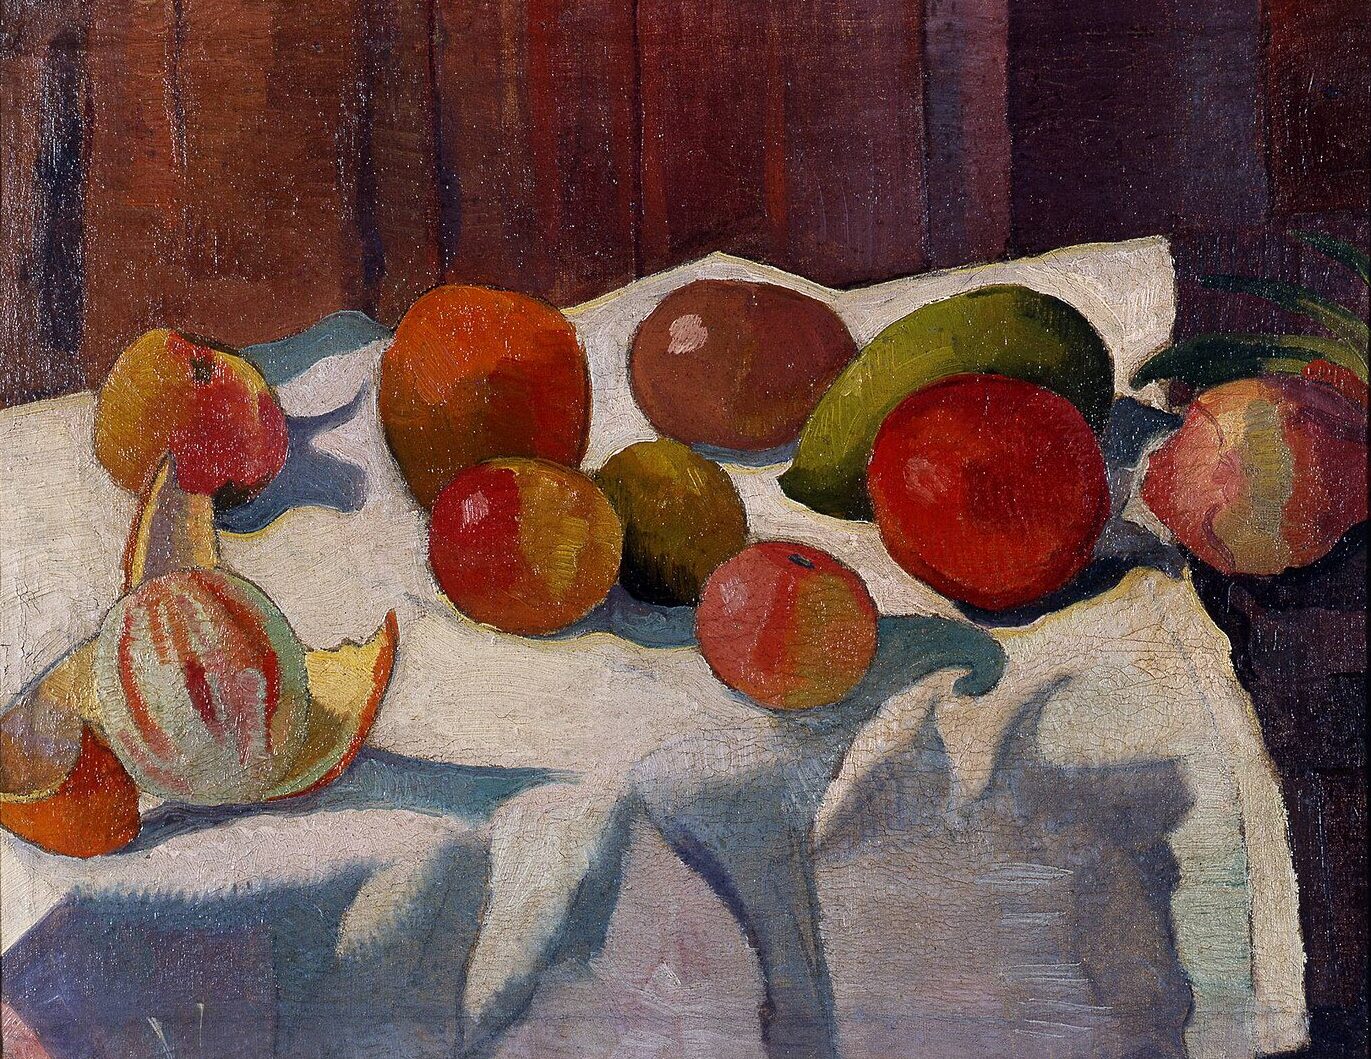 Still life of various kinds fruits laying on a tablecloth.